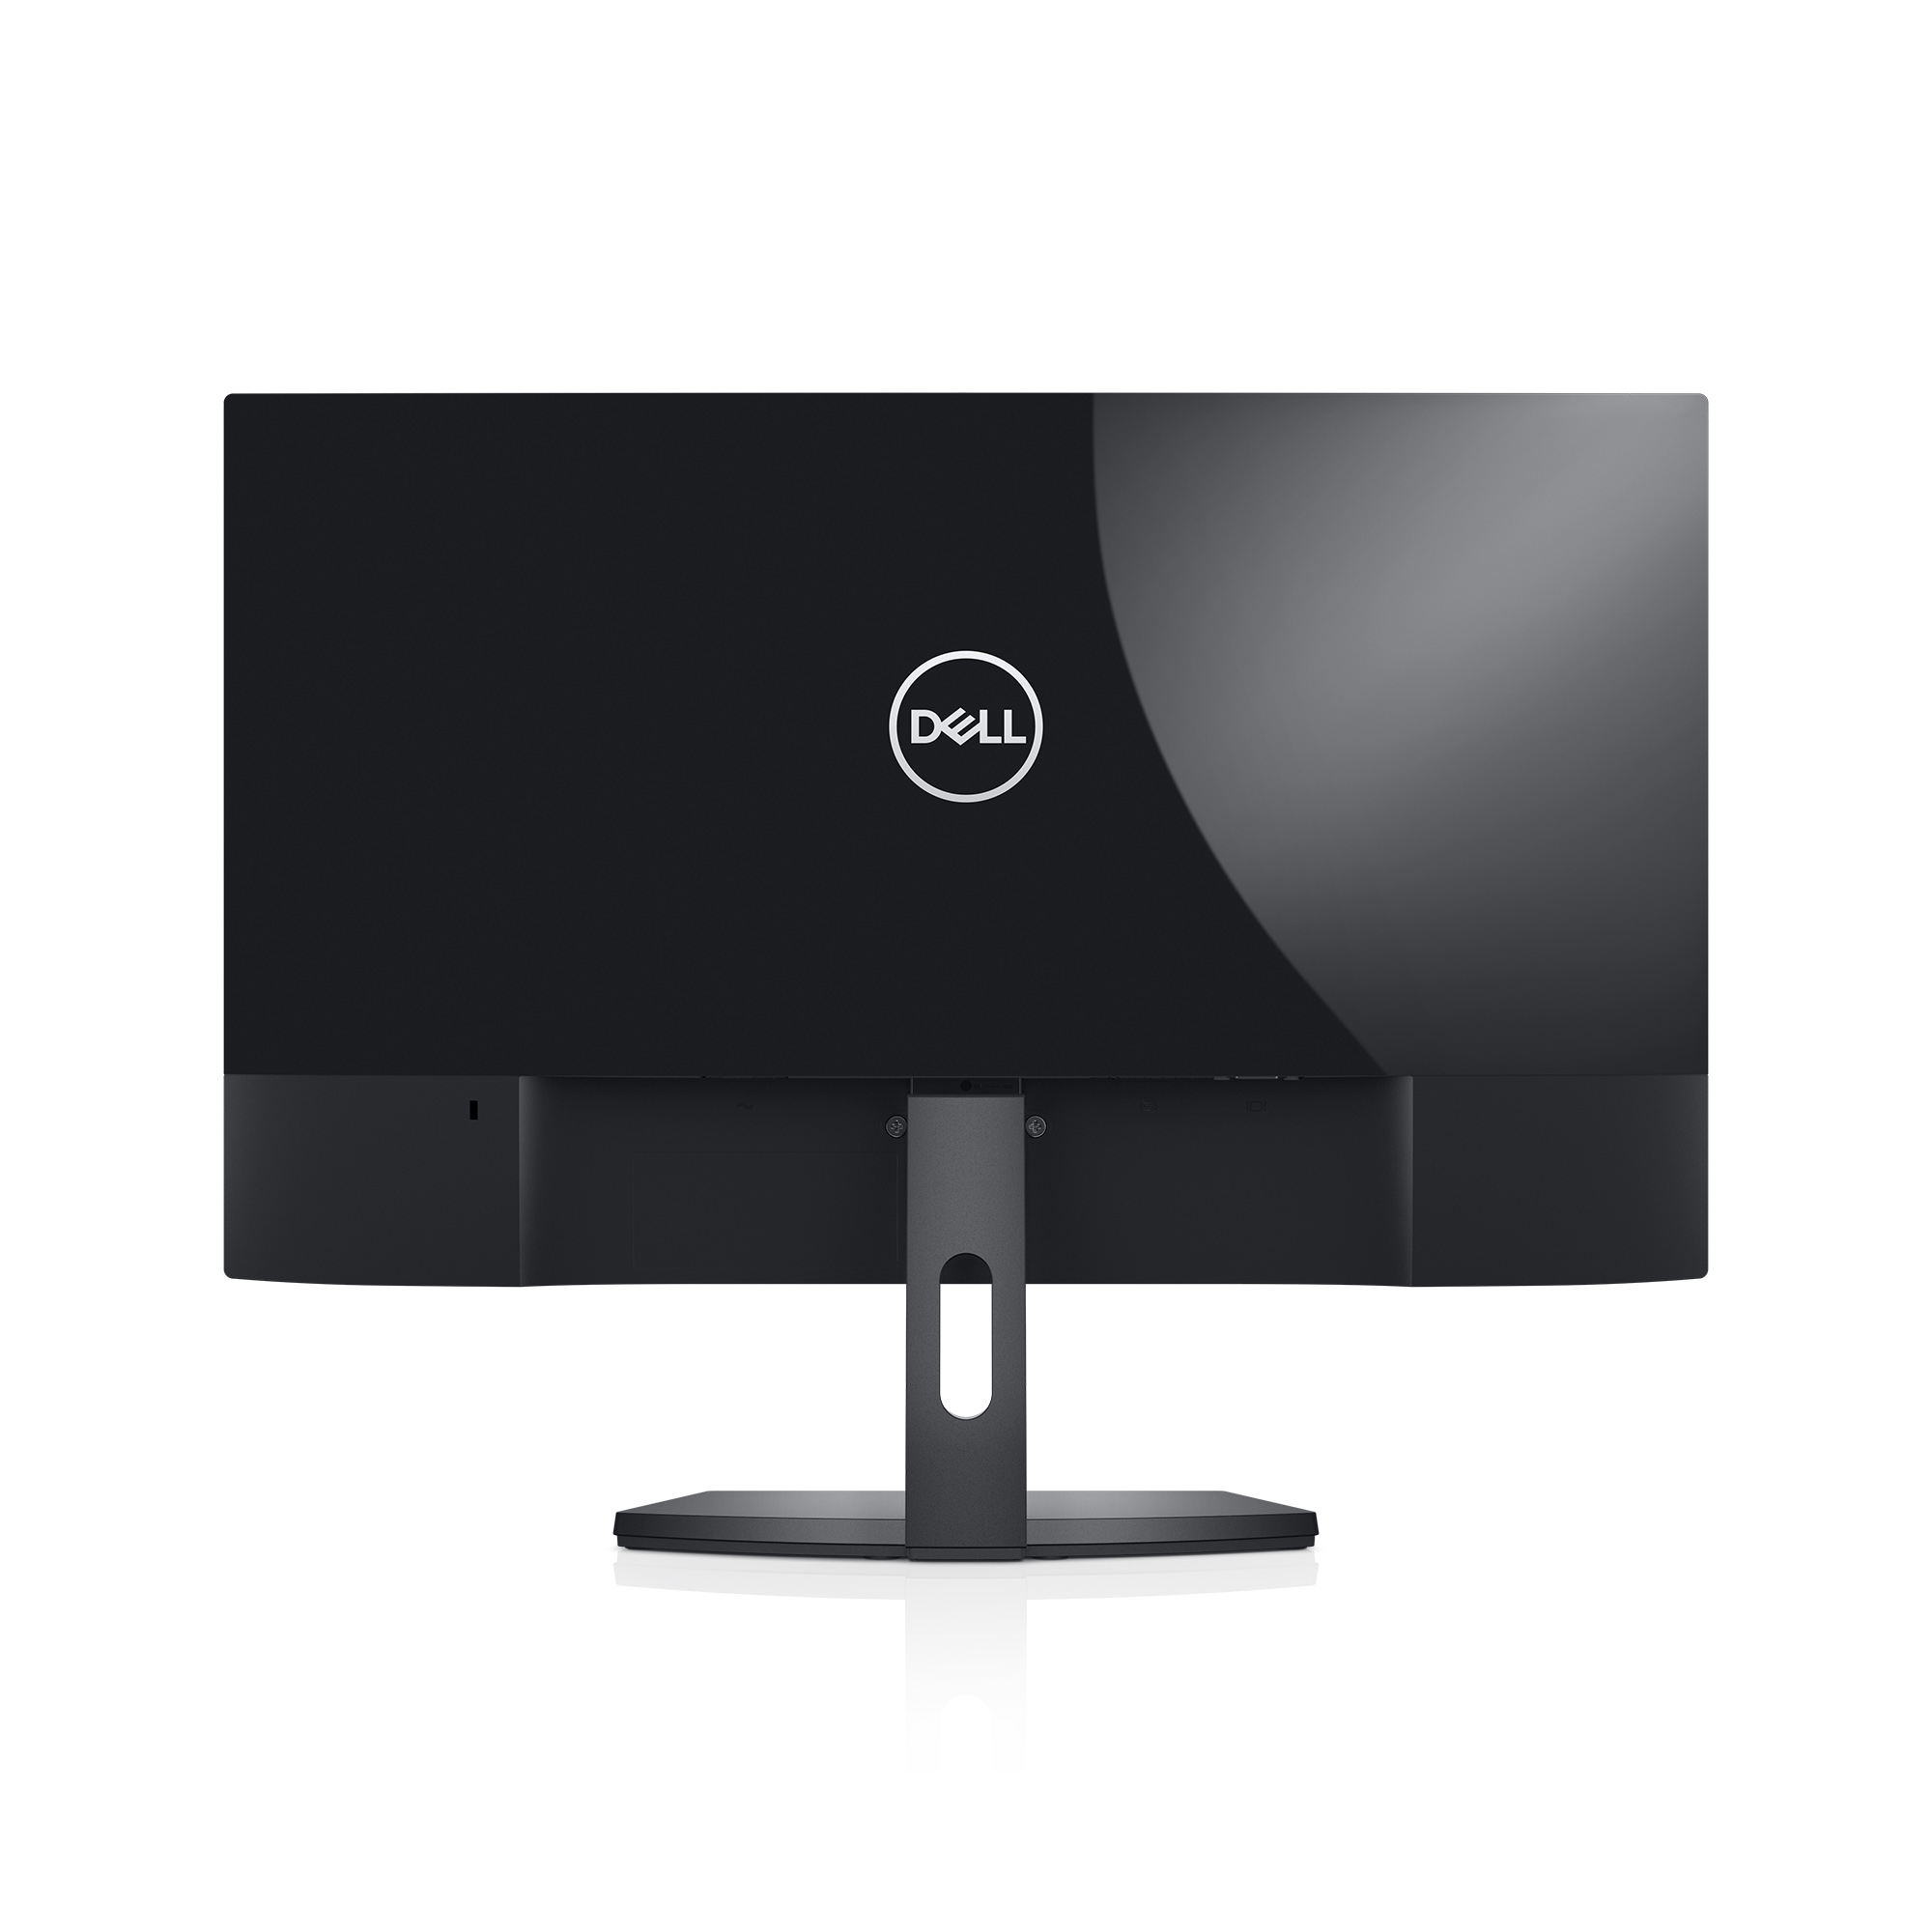 Dell SE2419H 24" IPS 1920x1080 HDMI VGA 60hz 5ms HD LED Monitor- 1 Year Advanced Exchange Warranty - image 3 of 7